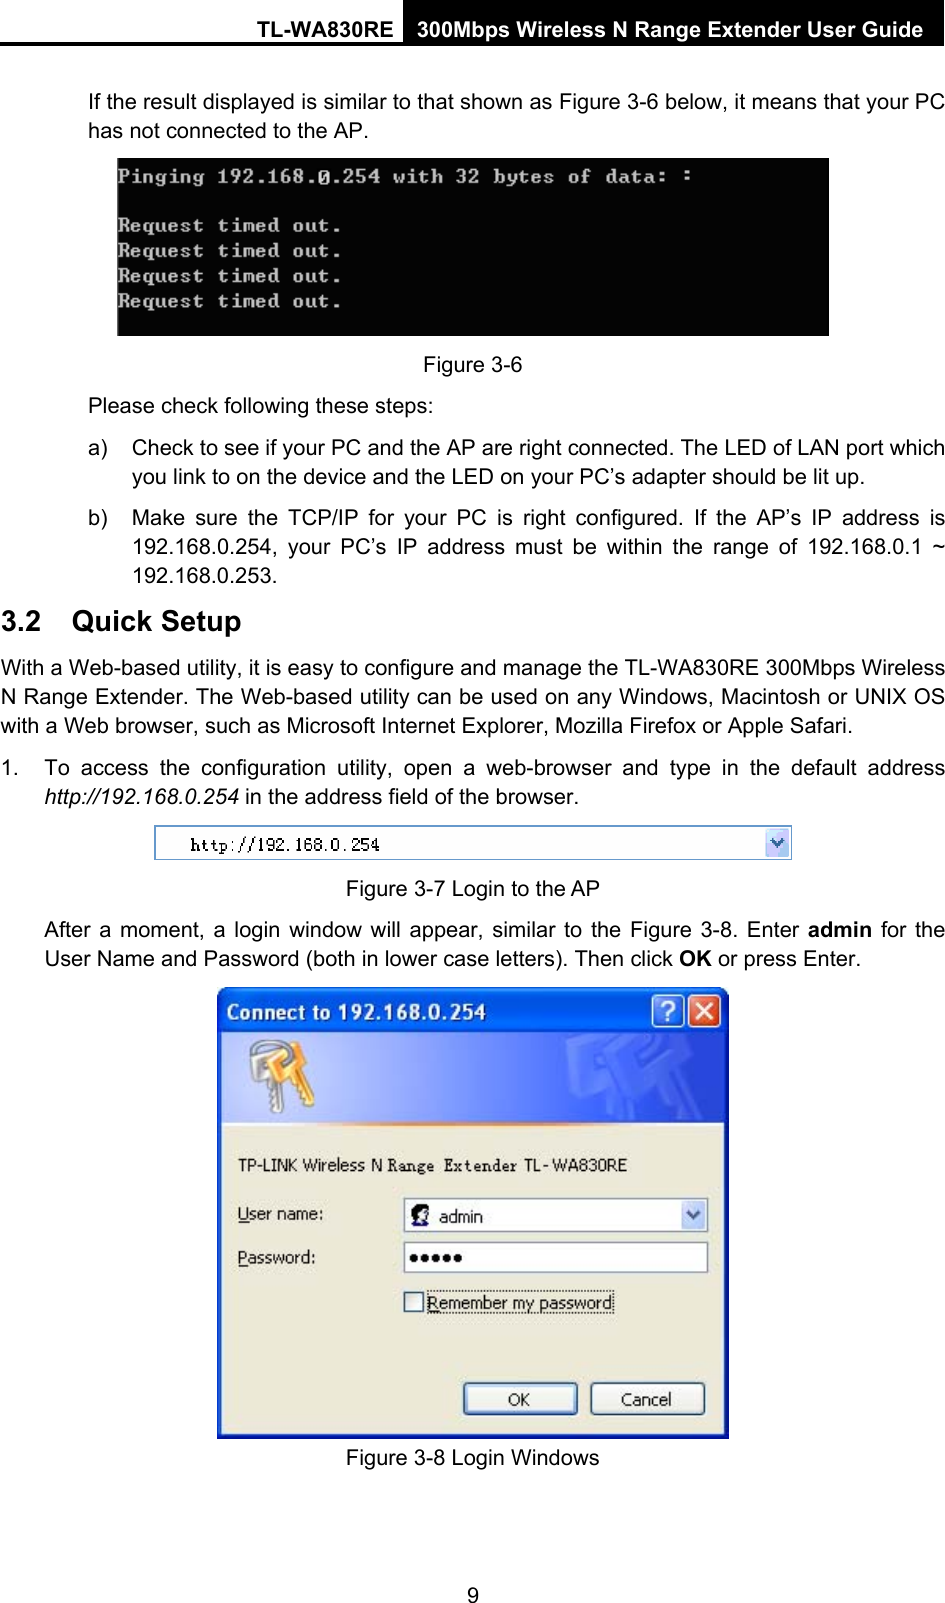 TL-WA830RE 300Mbps Wireless N Range Extender User Guide If the result displayed is similar to that shown as Figure 3-6 below, it means that your PC has not connected to the AP.  Figure 3-6 Please check following these steps: a)  Check to see if your PC and the AP are right connected. The LED of LAN port which you link to on the device and the LED on your PC’s adapter should be lit up. b)  Make sure the TCP/IP for your PC is right configured. If the AP’s IP address is 192.168.0.254, your PC’s IP address must be within the range of 192.168.0.1 ~ 192.168.0.253. 3.2  Quick Setup With a Web-based utility, it is easy to configure and manage the TL-WA830RE 300Mbps Wireless N Range Extender. The Web-based utility can be used on any Windows, Macintosh or UNIX OS with a Web browser, such as Microsoft Internet Explorer, Mozilla Firefox or Apple Safari. 1.  To access the configuration utility, open a web-browser and type in the default address http://192.168.0.254 in the address field of the browser.  Figure 3-7 Login to the AP After a moment, a login window will appear, similar to the Figure 3-8. Enter admin for the User Name and Password (both in lower case letters). Then click OK or press Enter.  Figure 3-8 Login Windows 9 